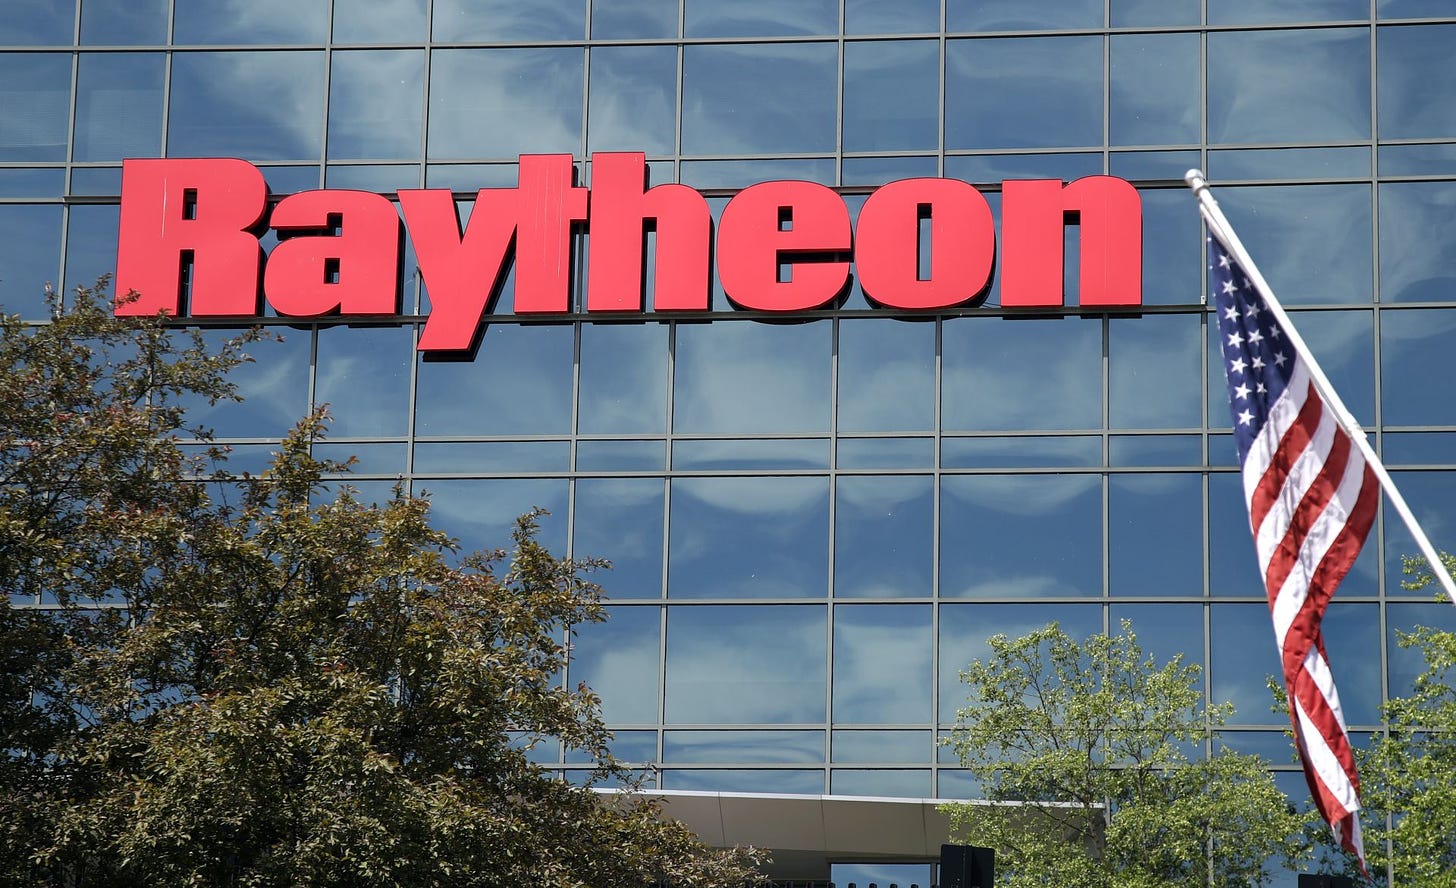 United Technologies and Raytheon Complete Merger of Equals Transaction - Defense News